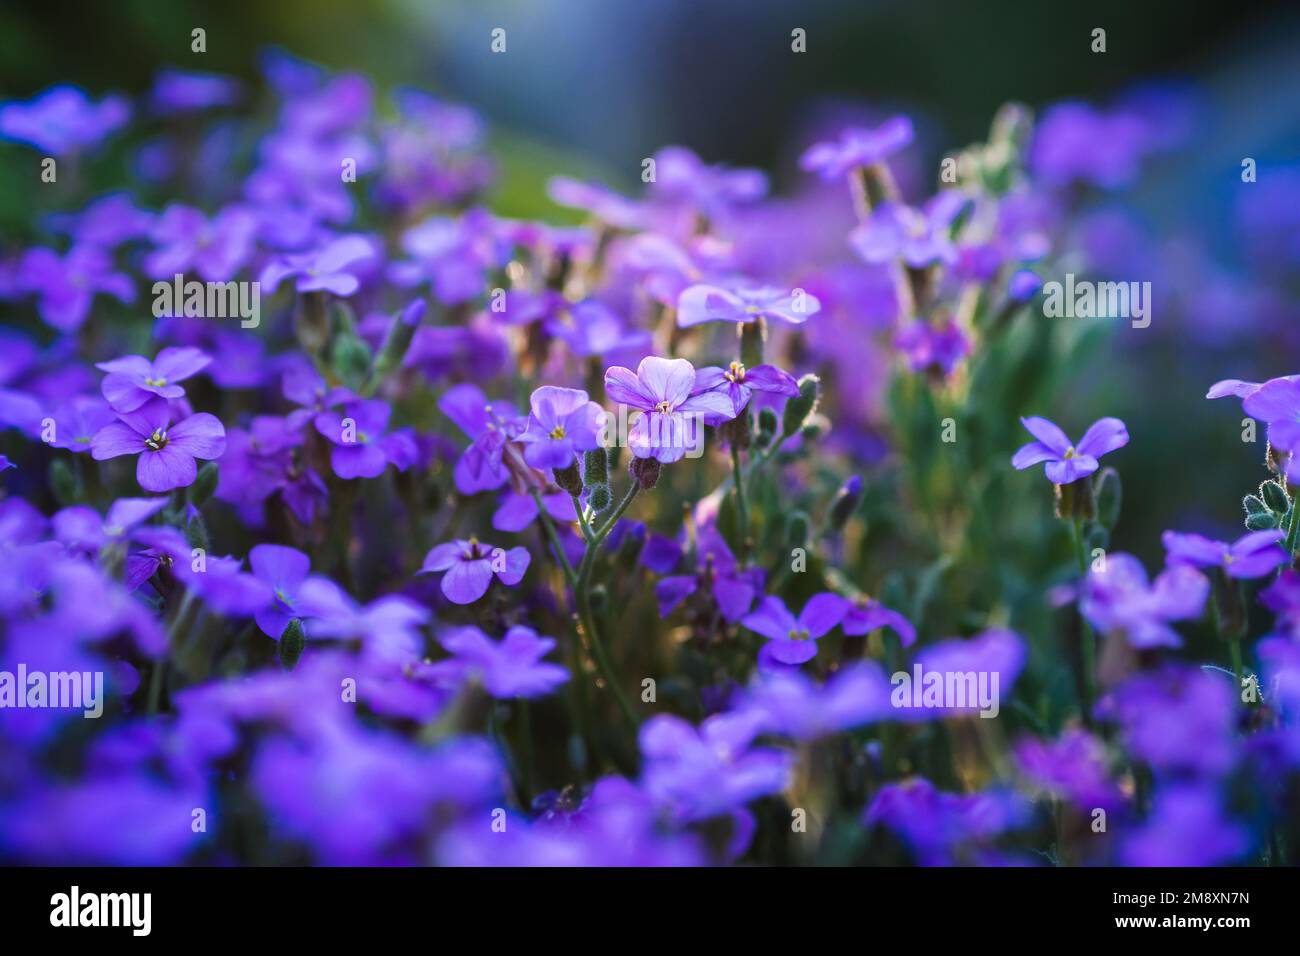 aubrieta blooming blue-violet flowers in spring garden close up Stock Photo